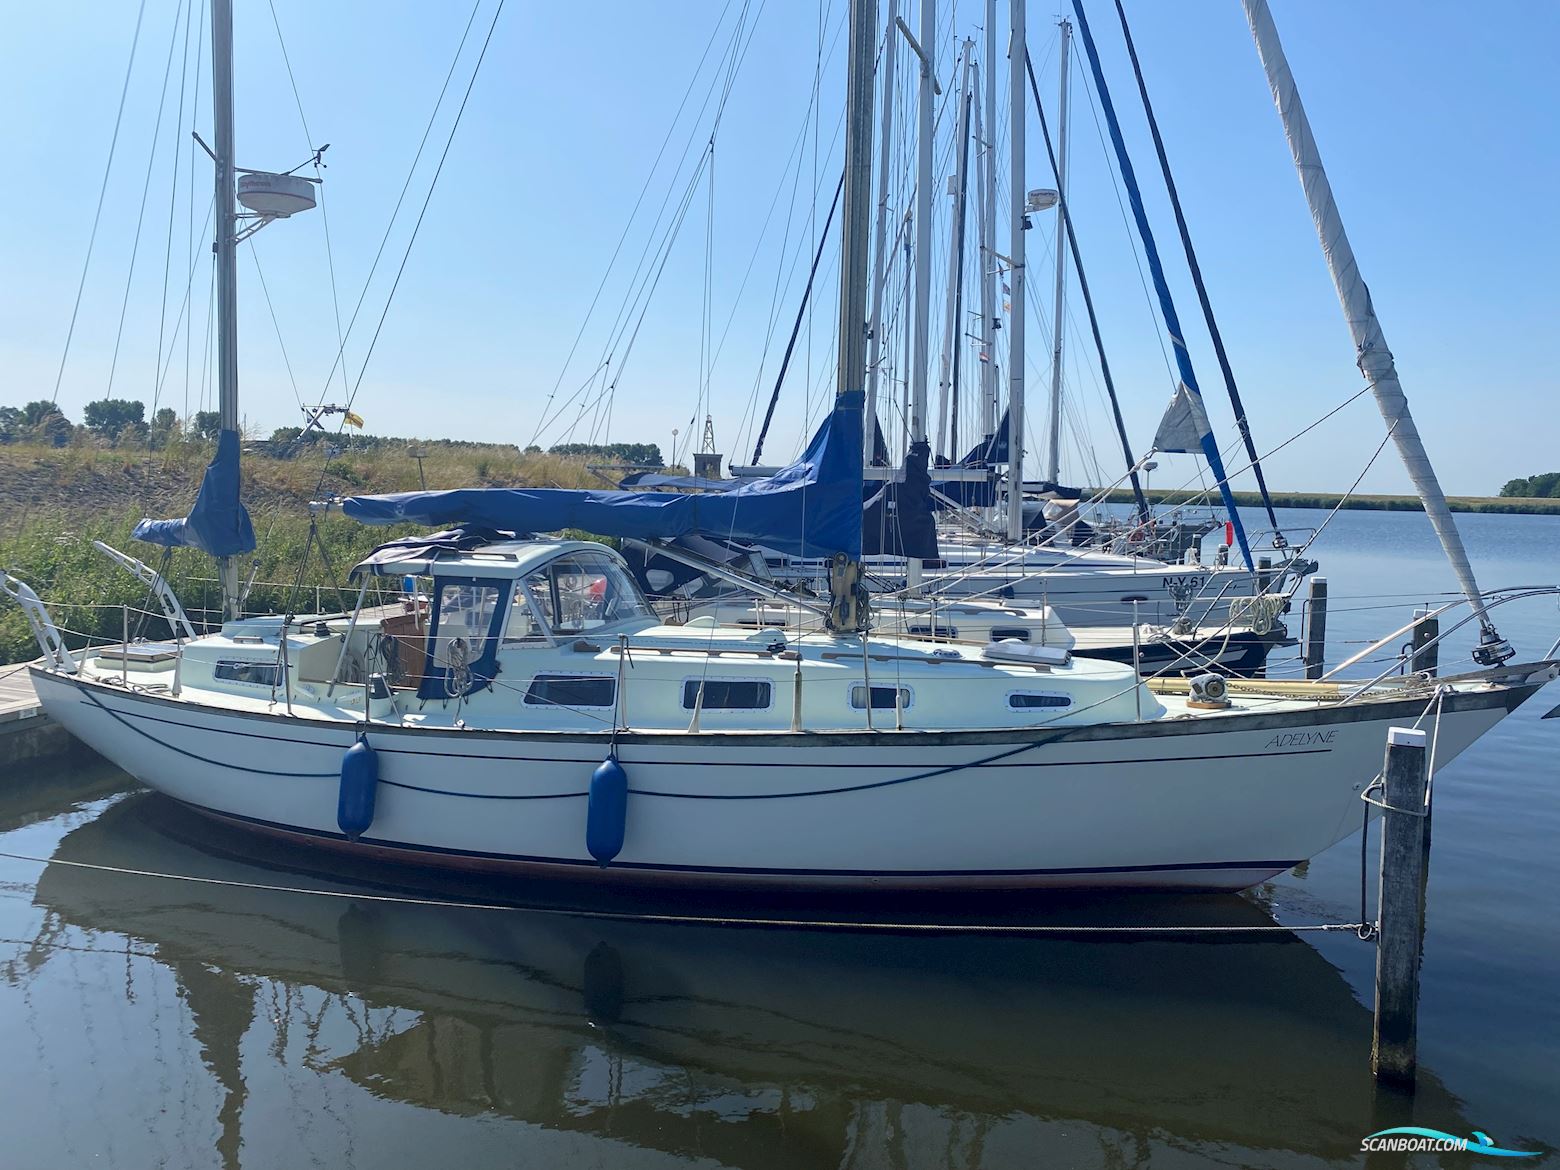 Camper & Nicholson 38 Sailing boat 1970, with Yanmar engine, The Netherlands